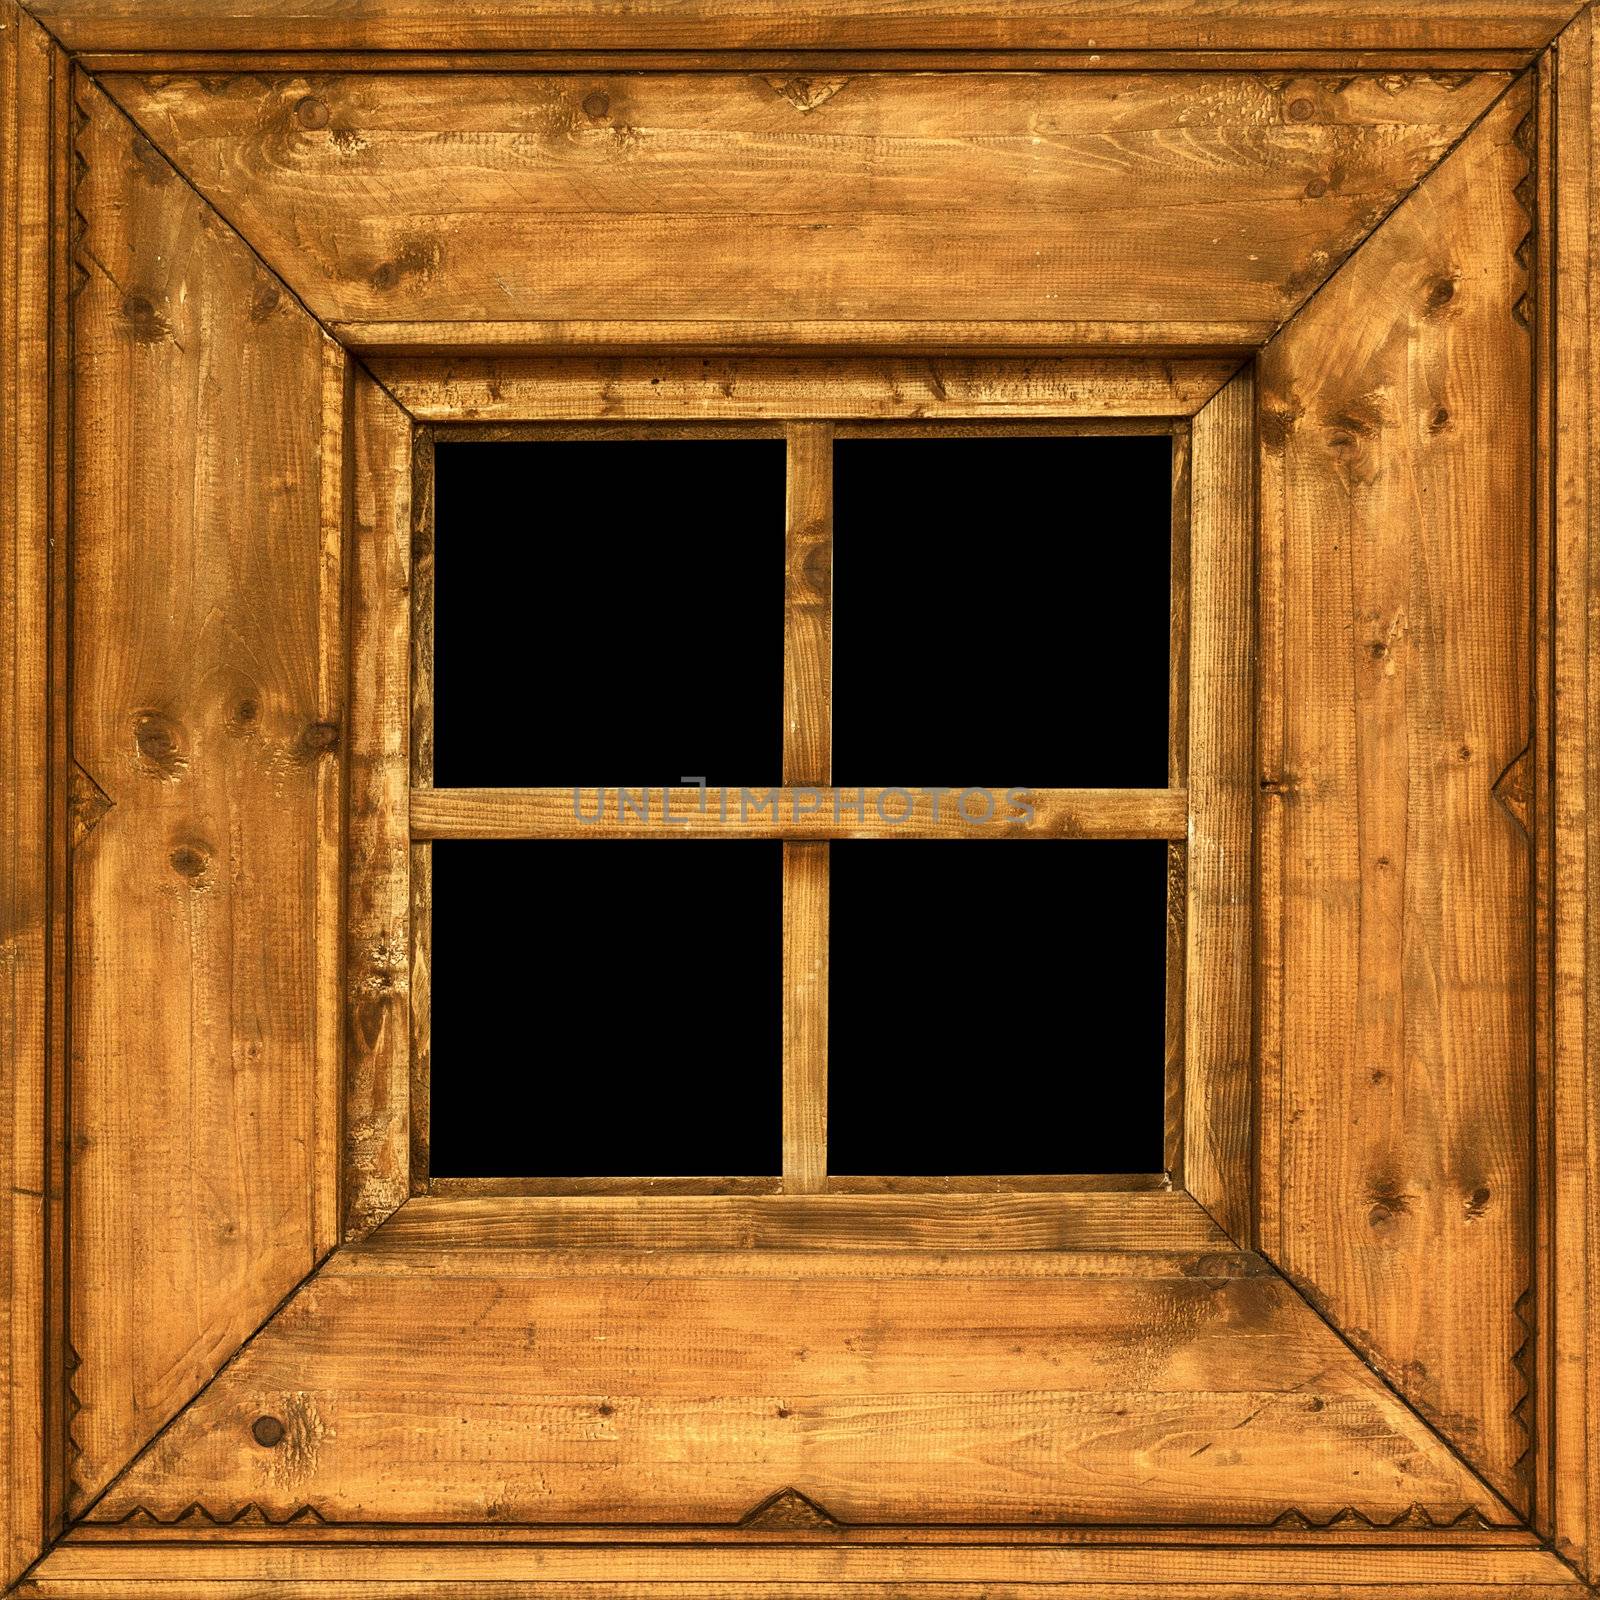 Old wooden rural window frame by pzaxe